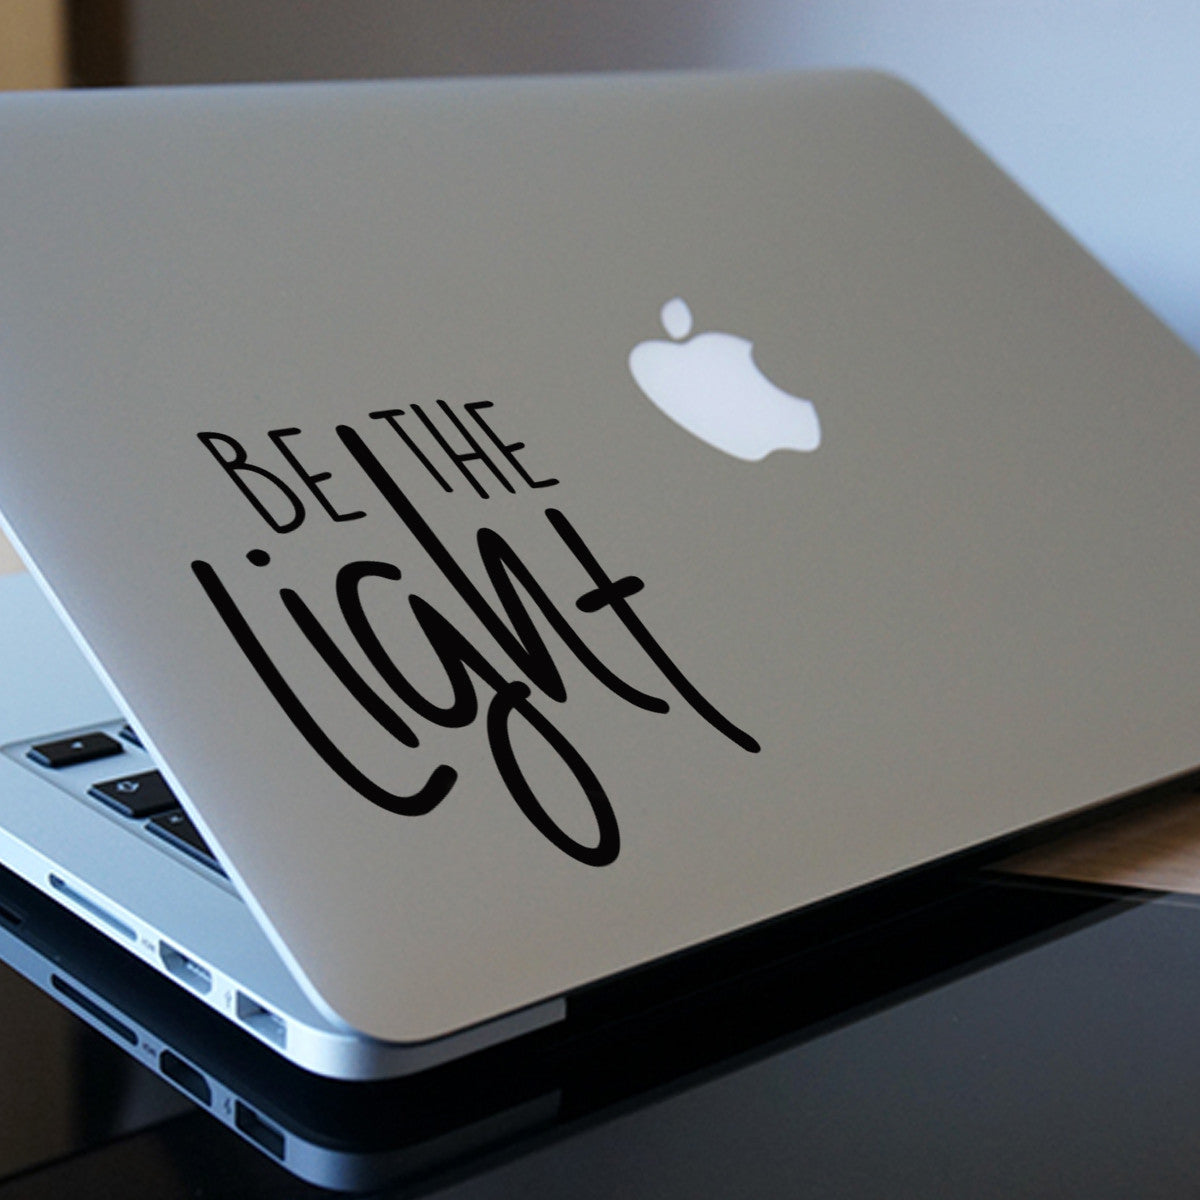 Be the Light Macbook Decal